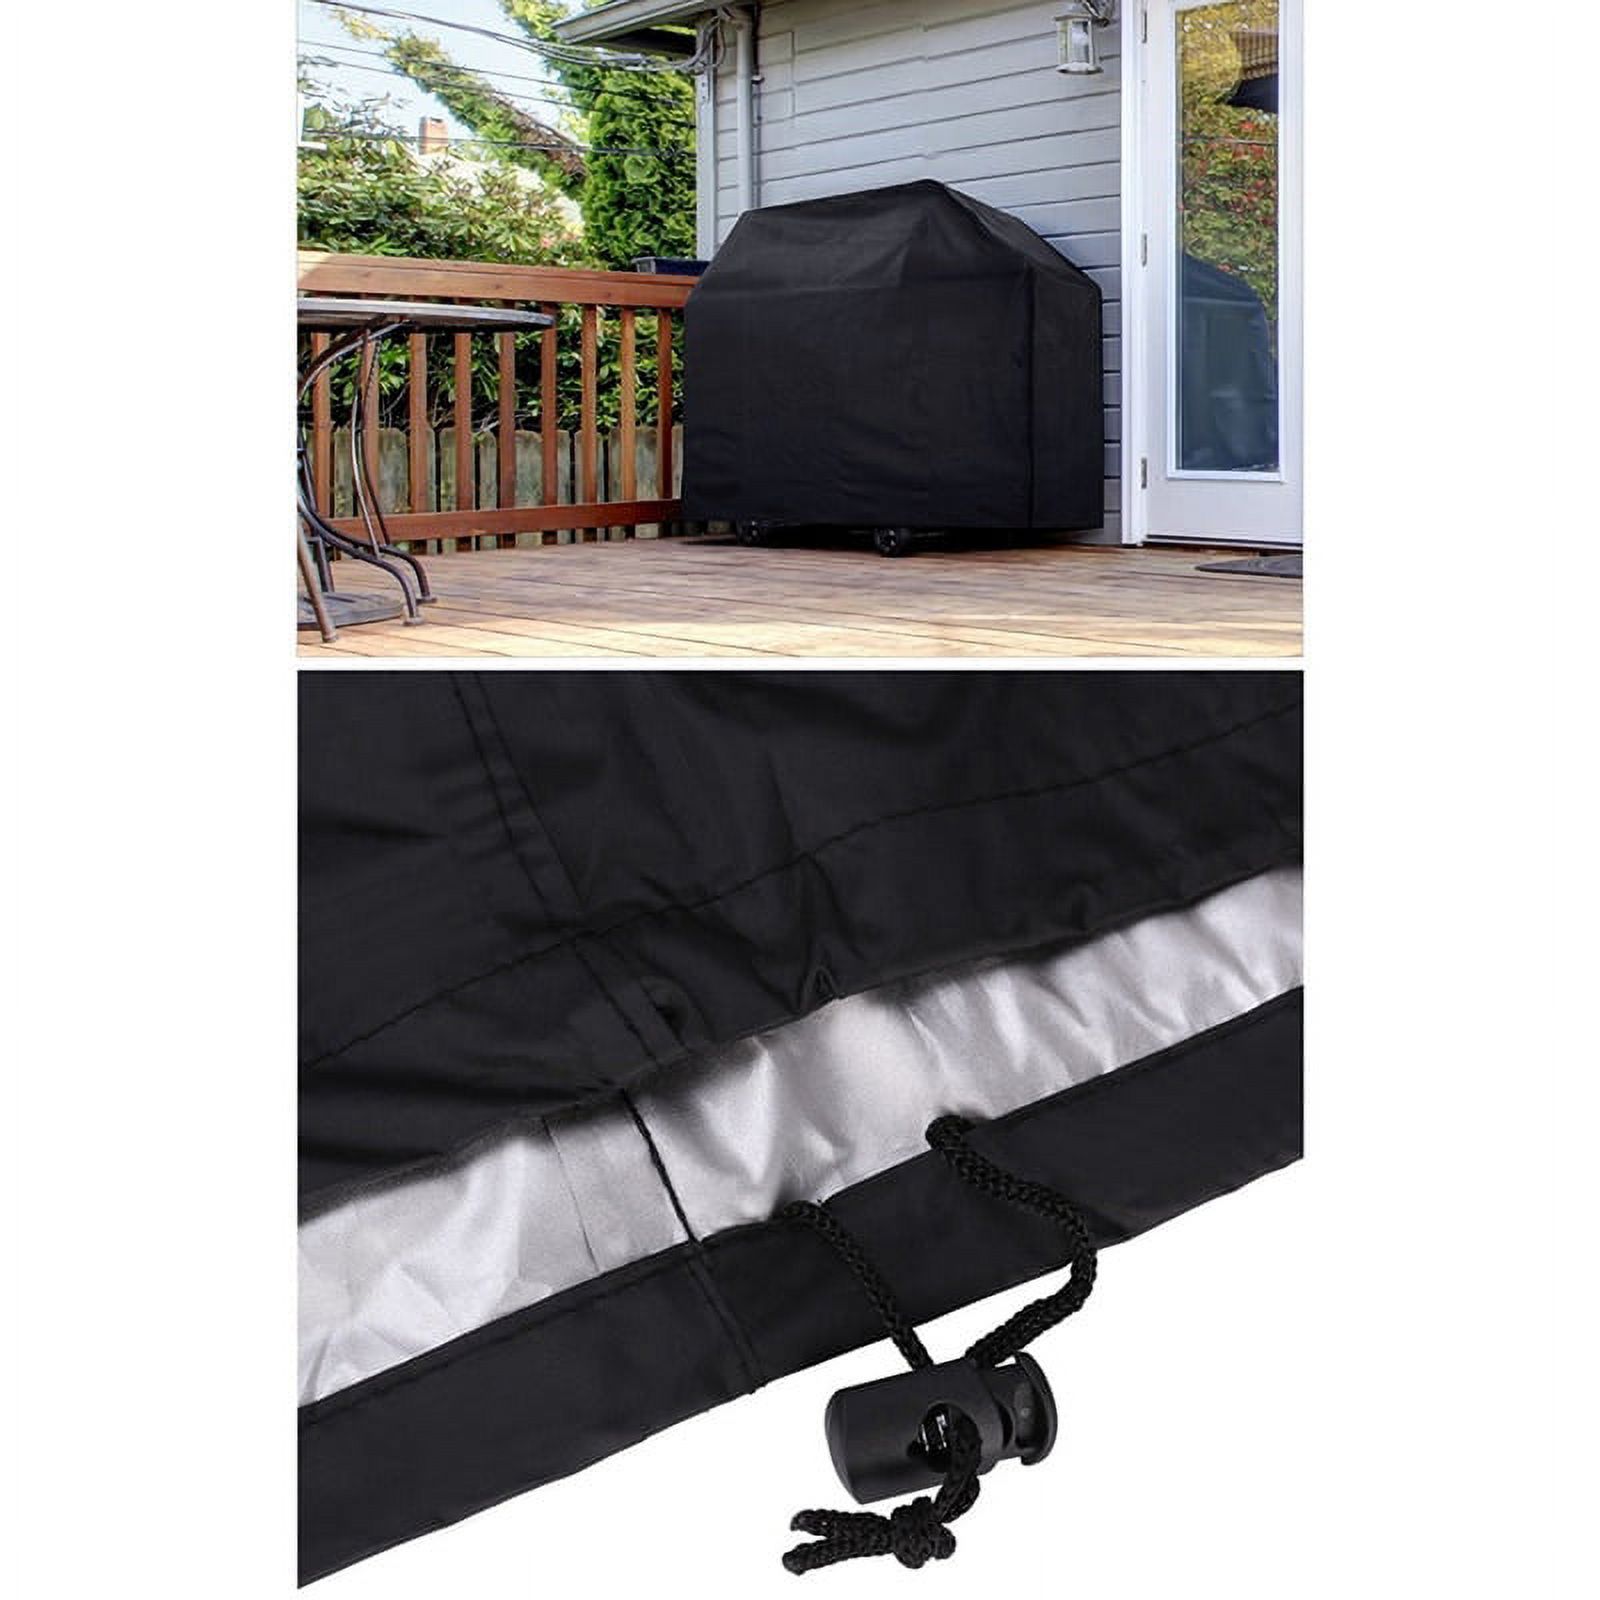 Grill Cover,BBQ Special Grill Cover,Waterproof and UV Resistant Material, Durable and Convenient,Fits Grills of Weber Char-Broil Nexgrill Brinkmann and More-Black - image 5 of 6